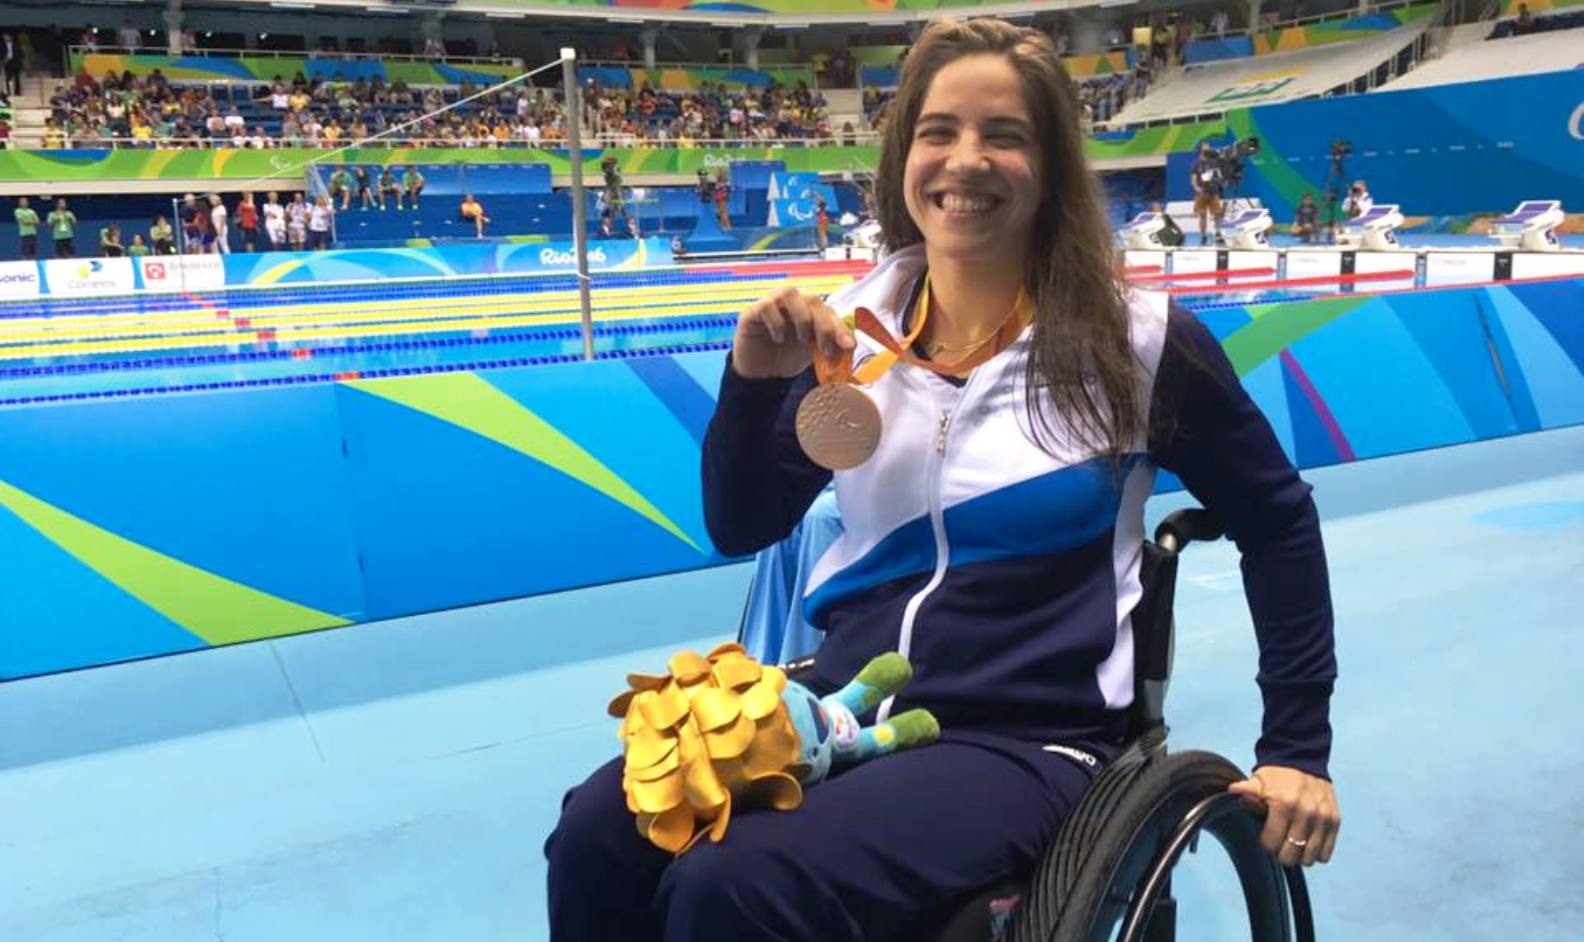 Team Israel’s Inbal Pezaro with her bronze medal on Sept. 15, 2016. Photo by Keren Isaacson/Israel Paralympic Committee